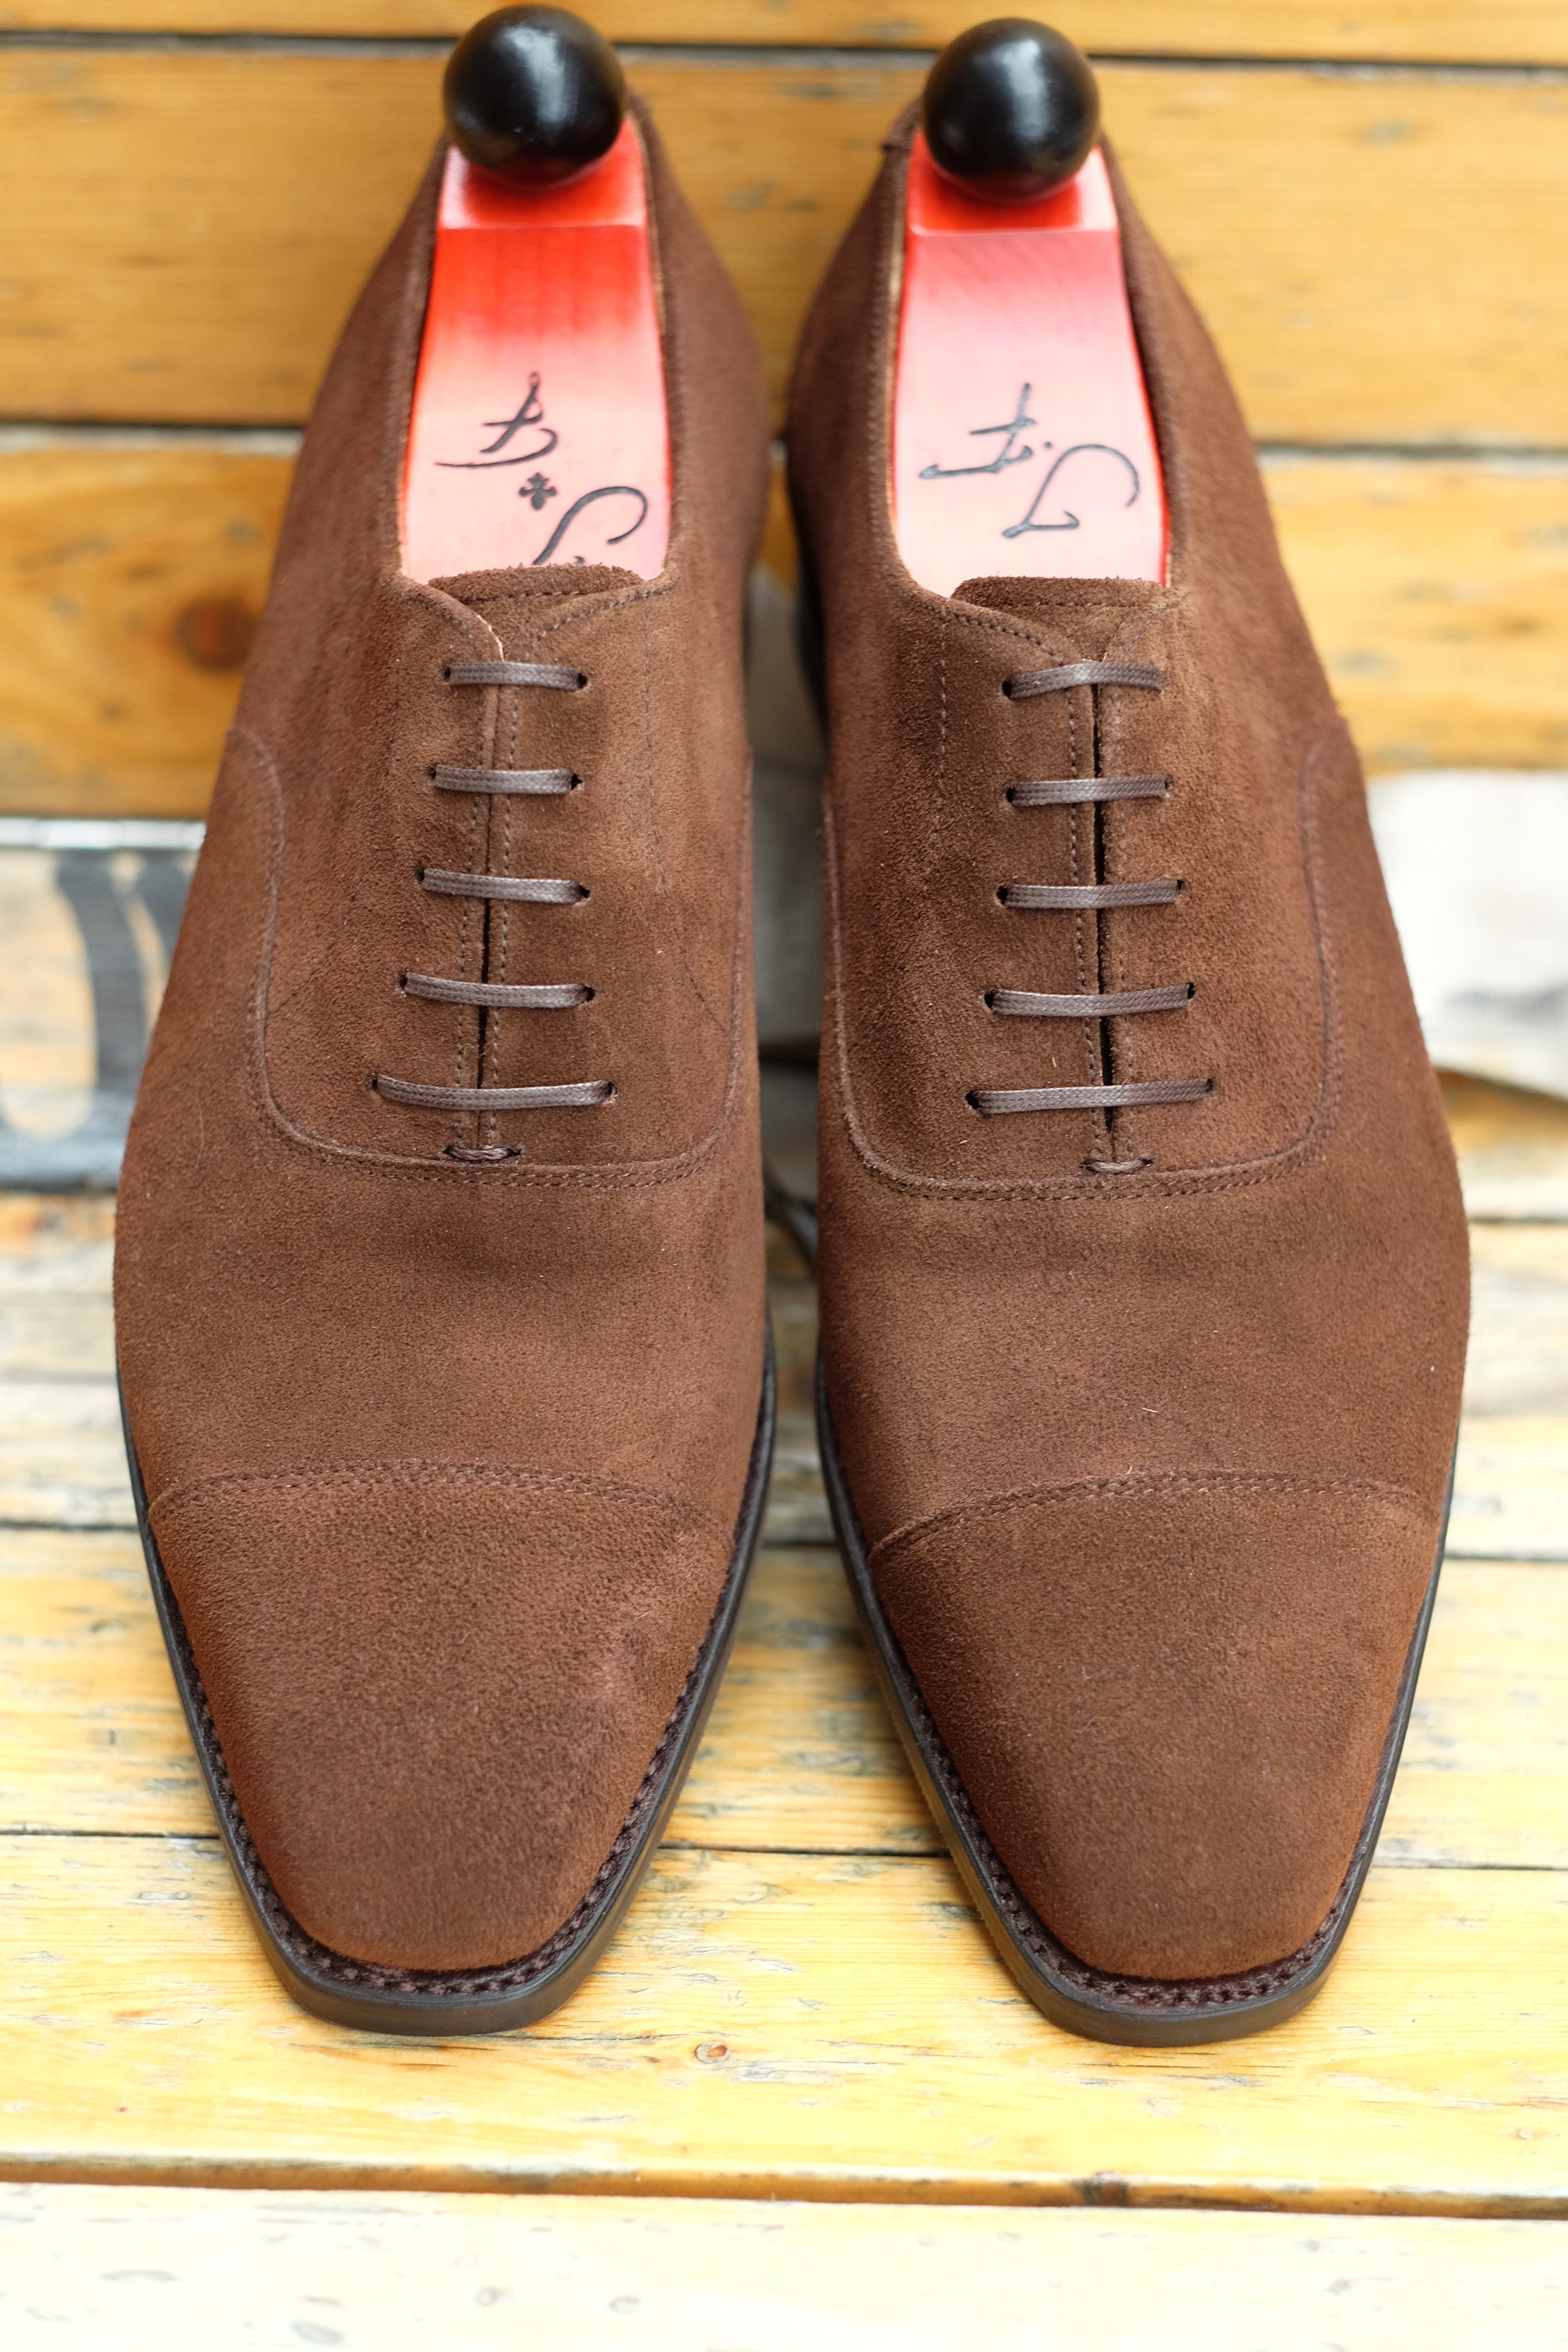 Puget - Mocha Suede - CLEARANCE